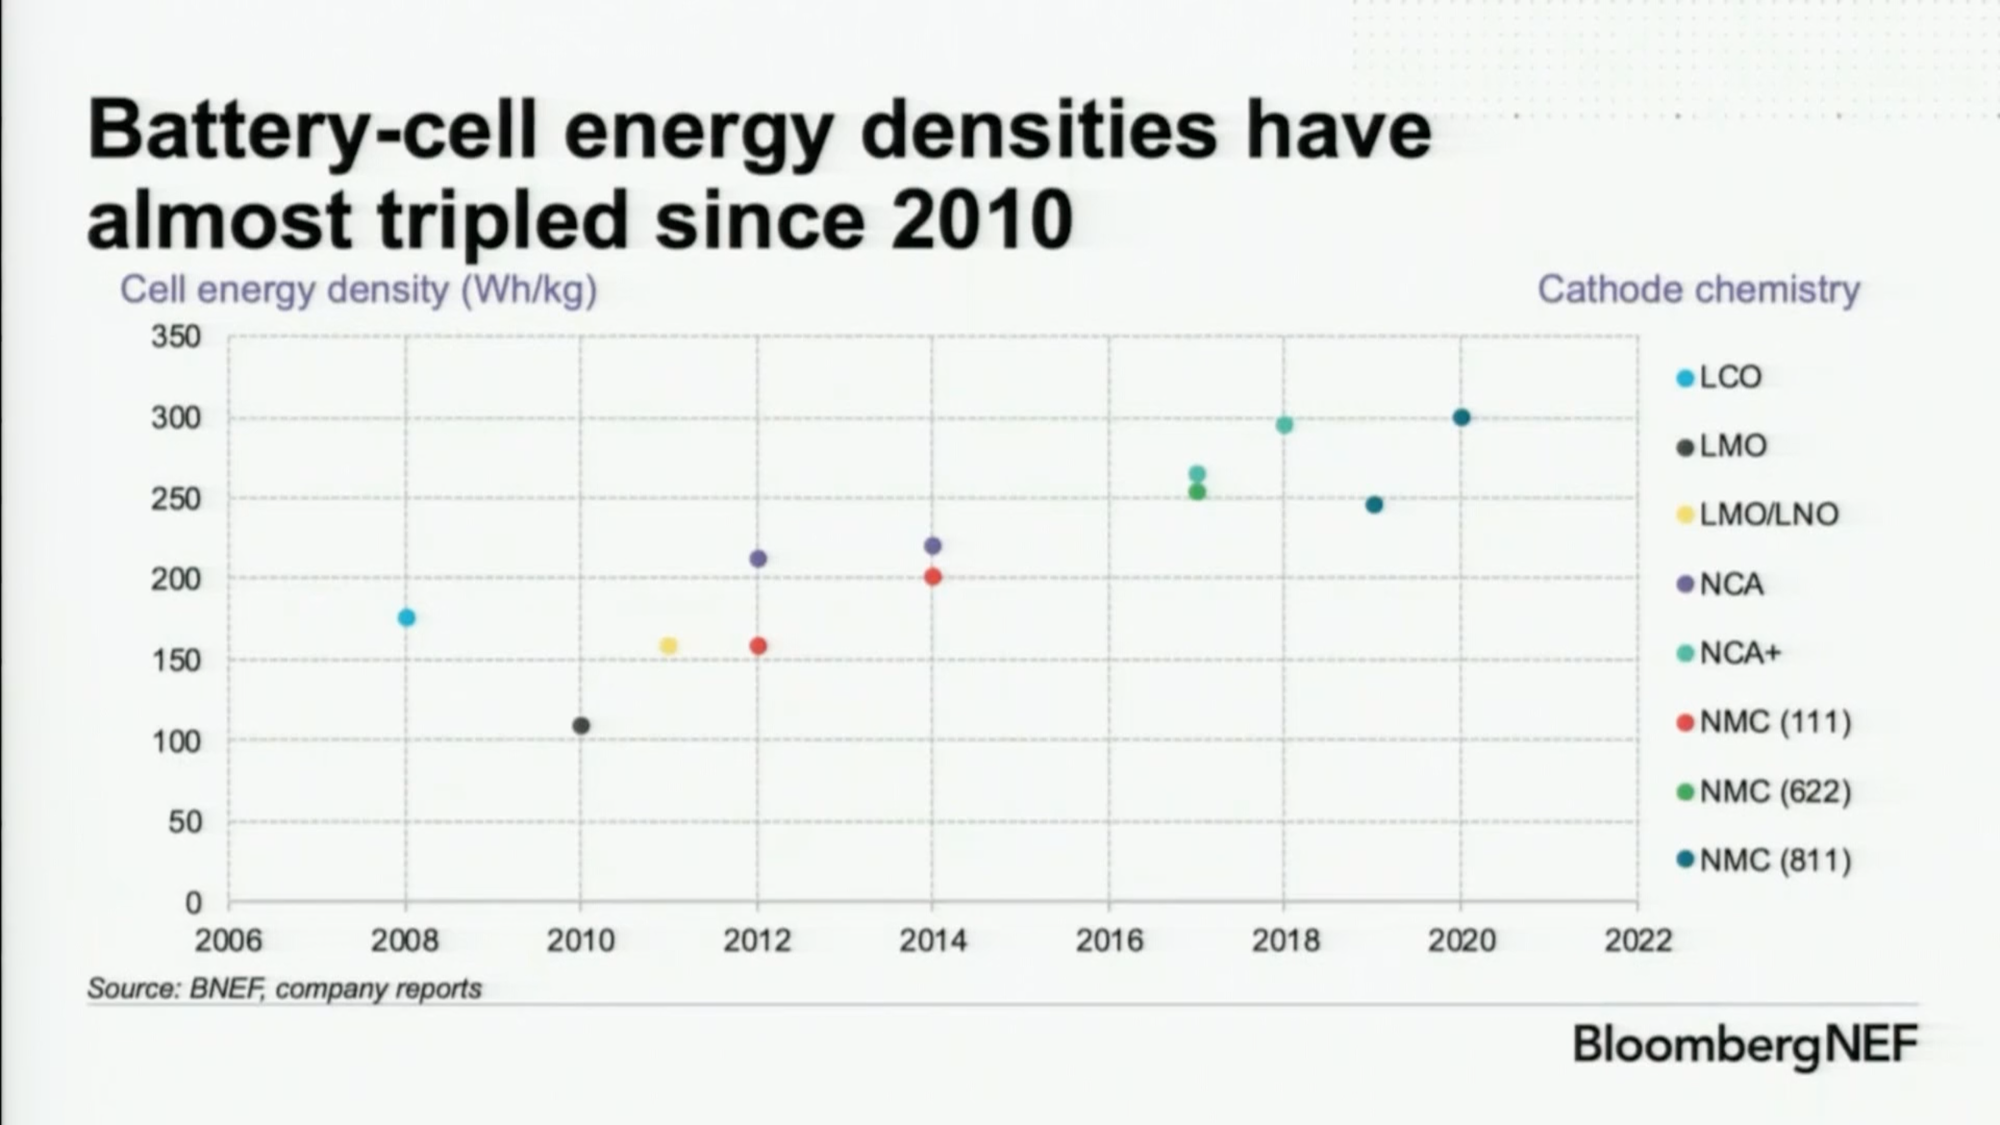 bloomberg-nef-battery-lithium-ion-cell-energy-density-chart-graph-BNEF.png